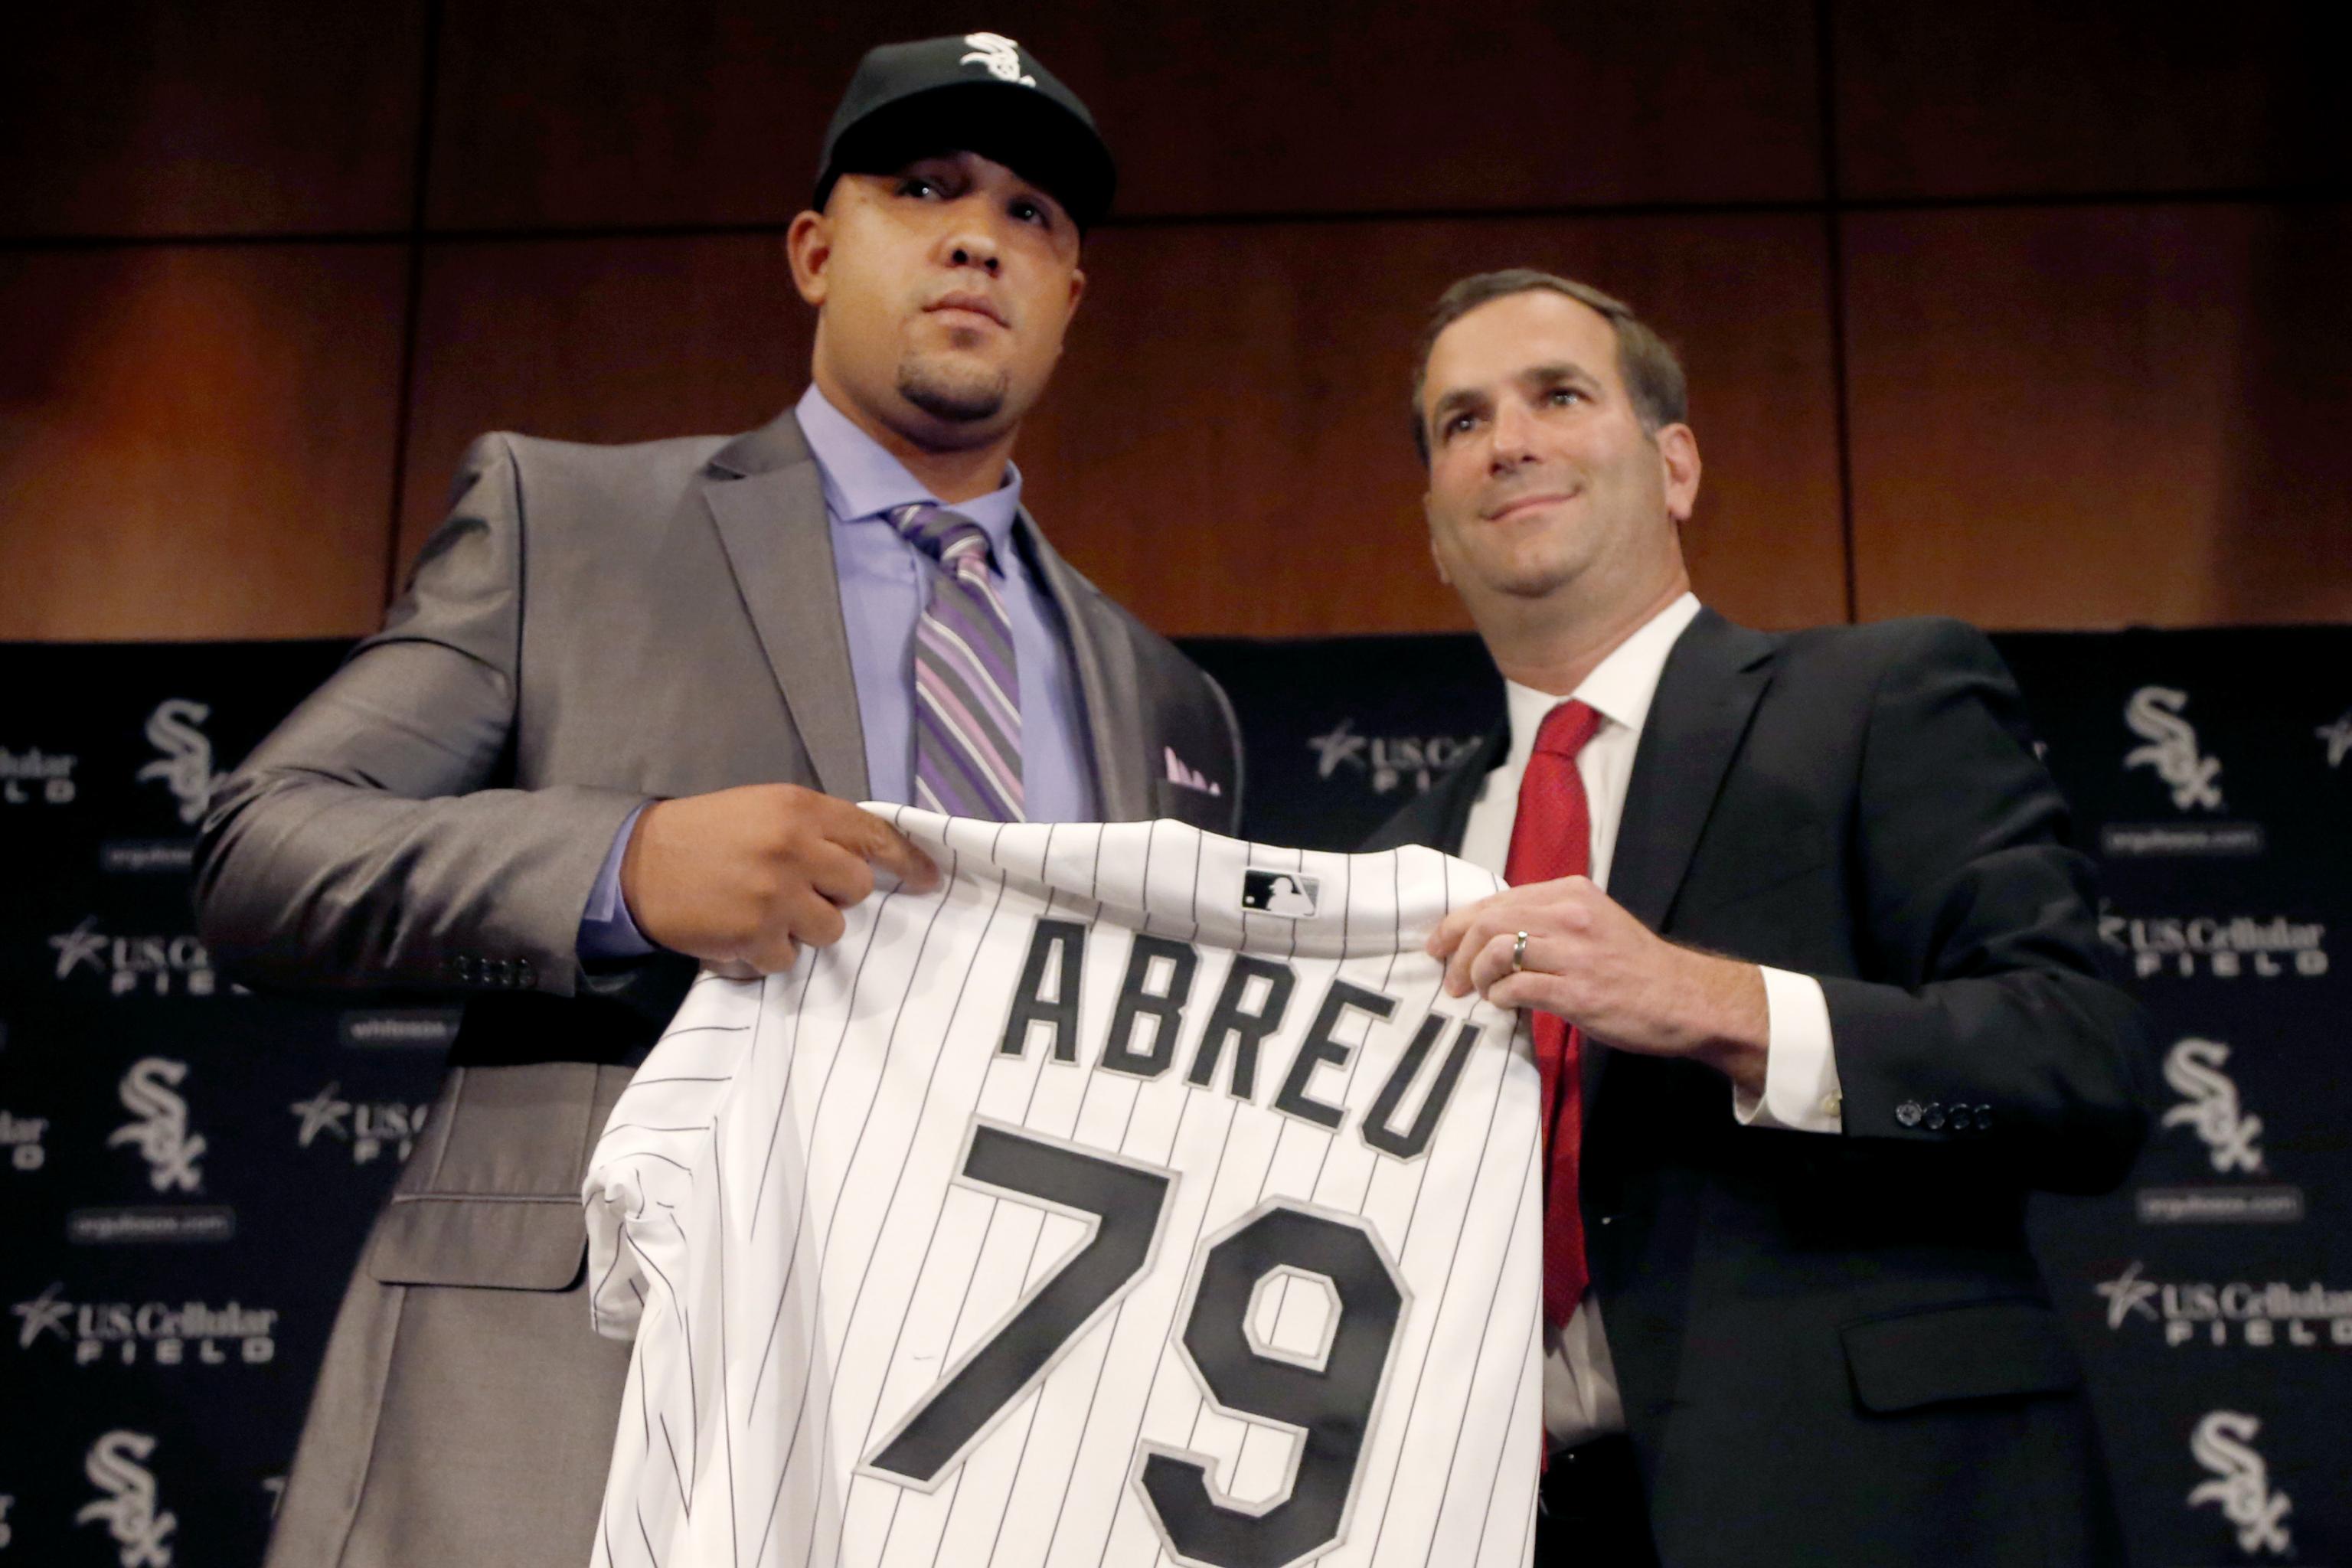 10 years of @mlb service for José Abreu. Congratulations on